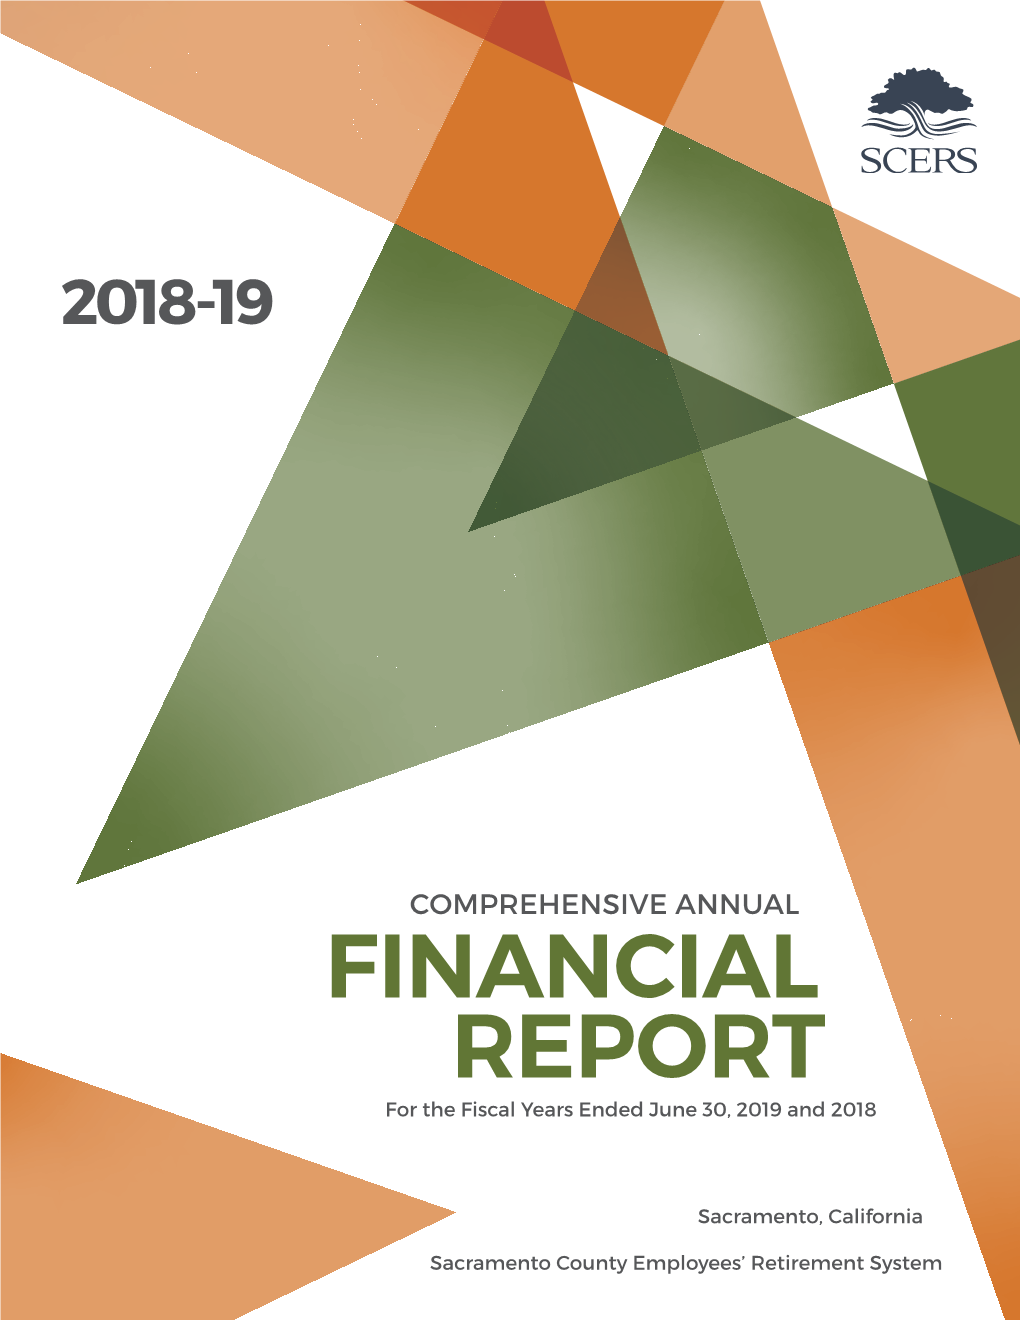 FINANCIAL REPORT for the Fiscal Years Ended June 30, 2019 and 2018